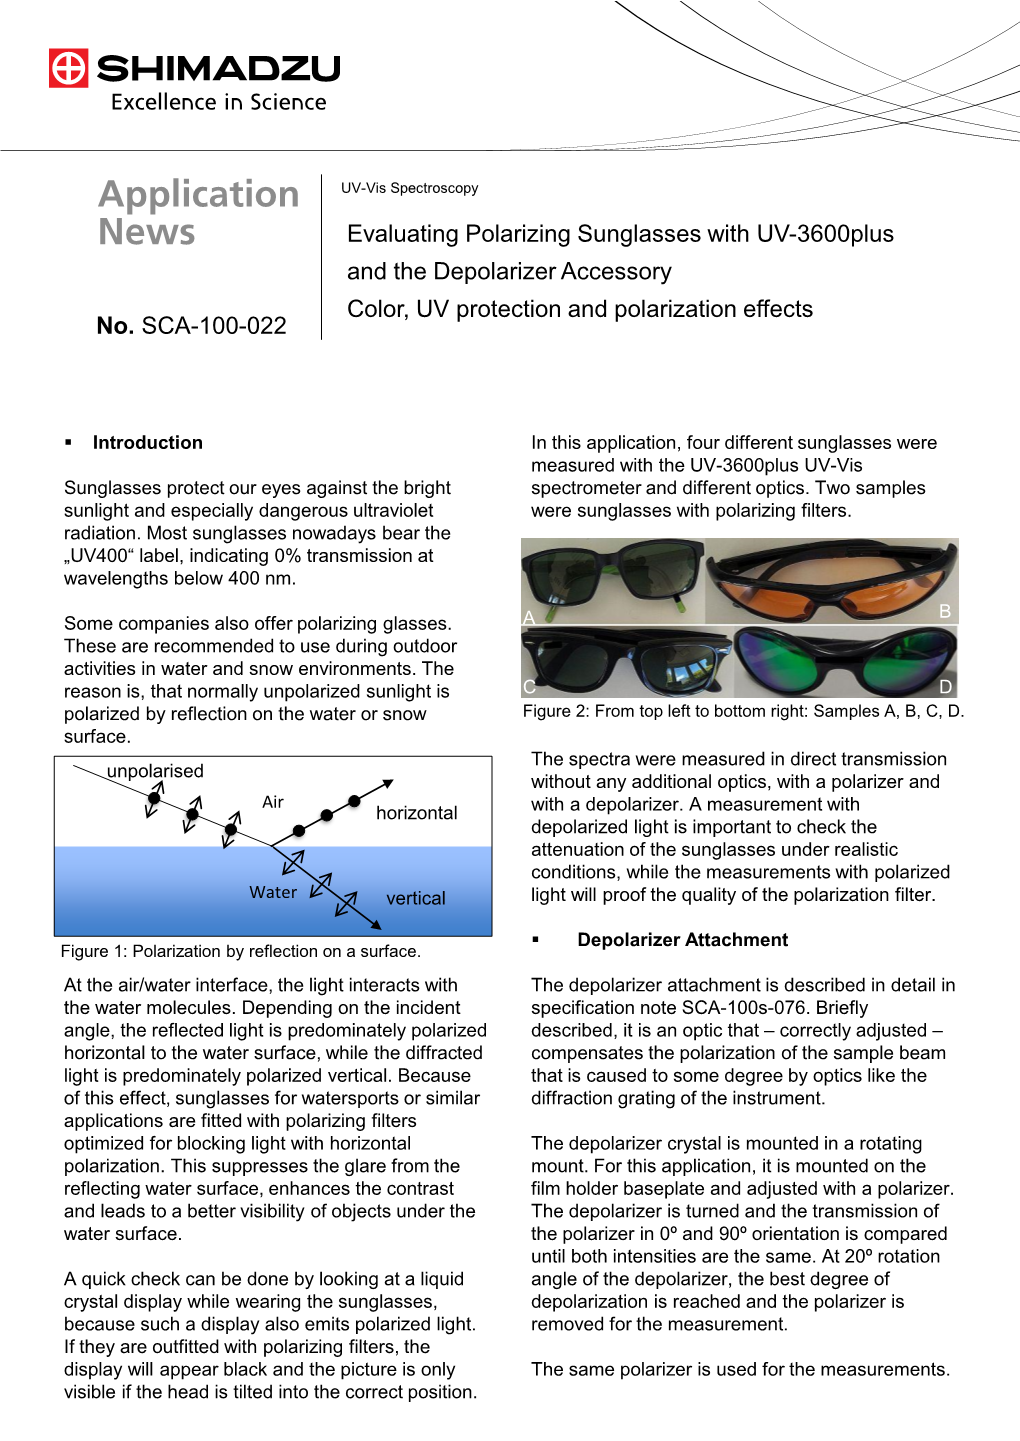 Evaluating Polarizing Sunglasses with UV-3600Plus and the Depolarizer Accessory Color, UV Protection and Polarization Effects No